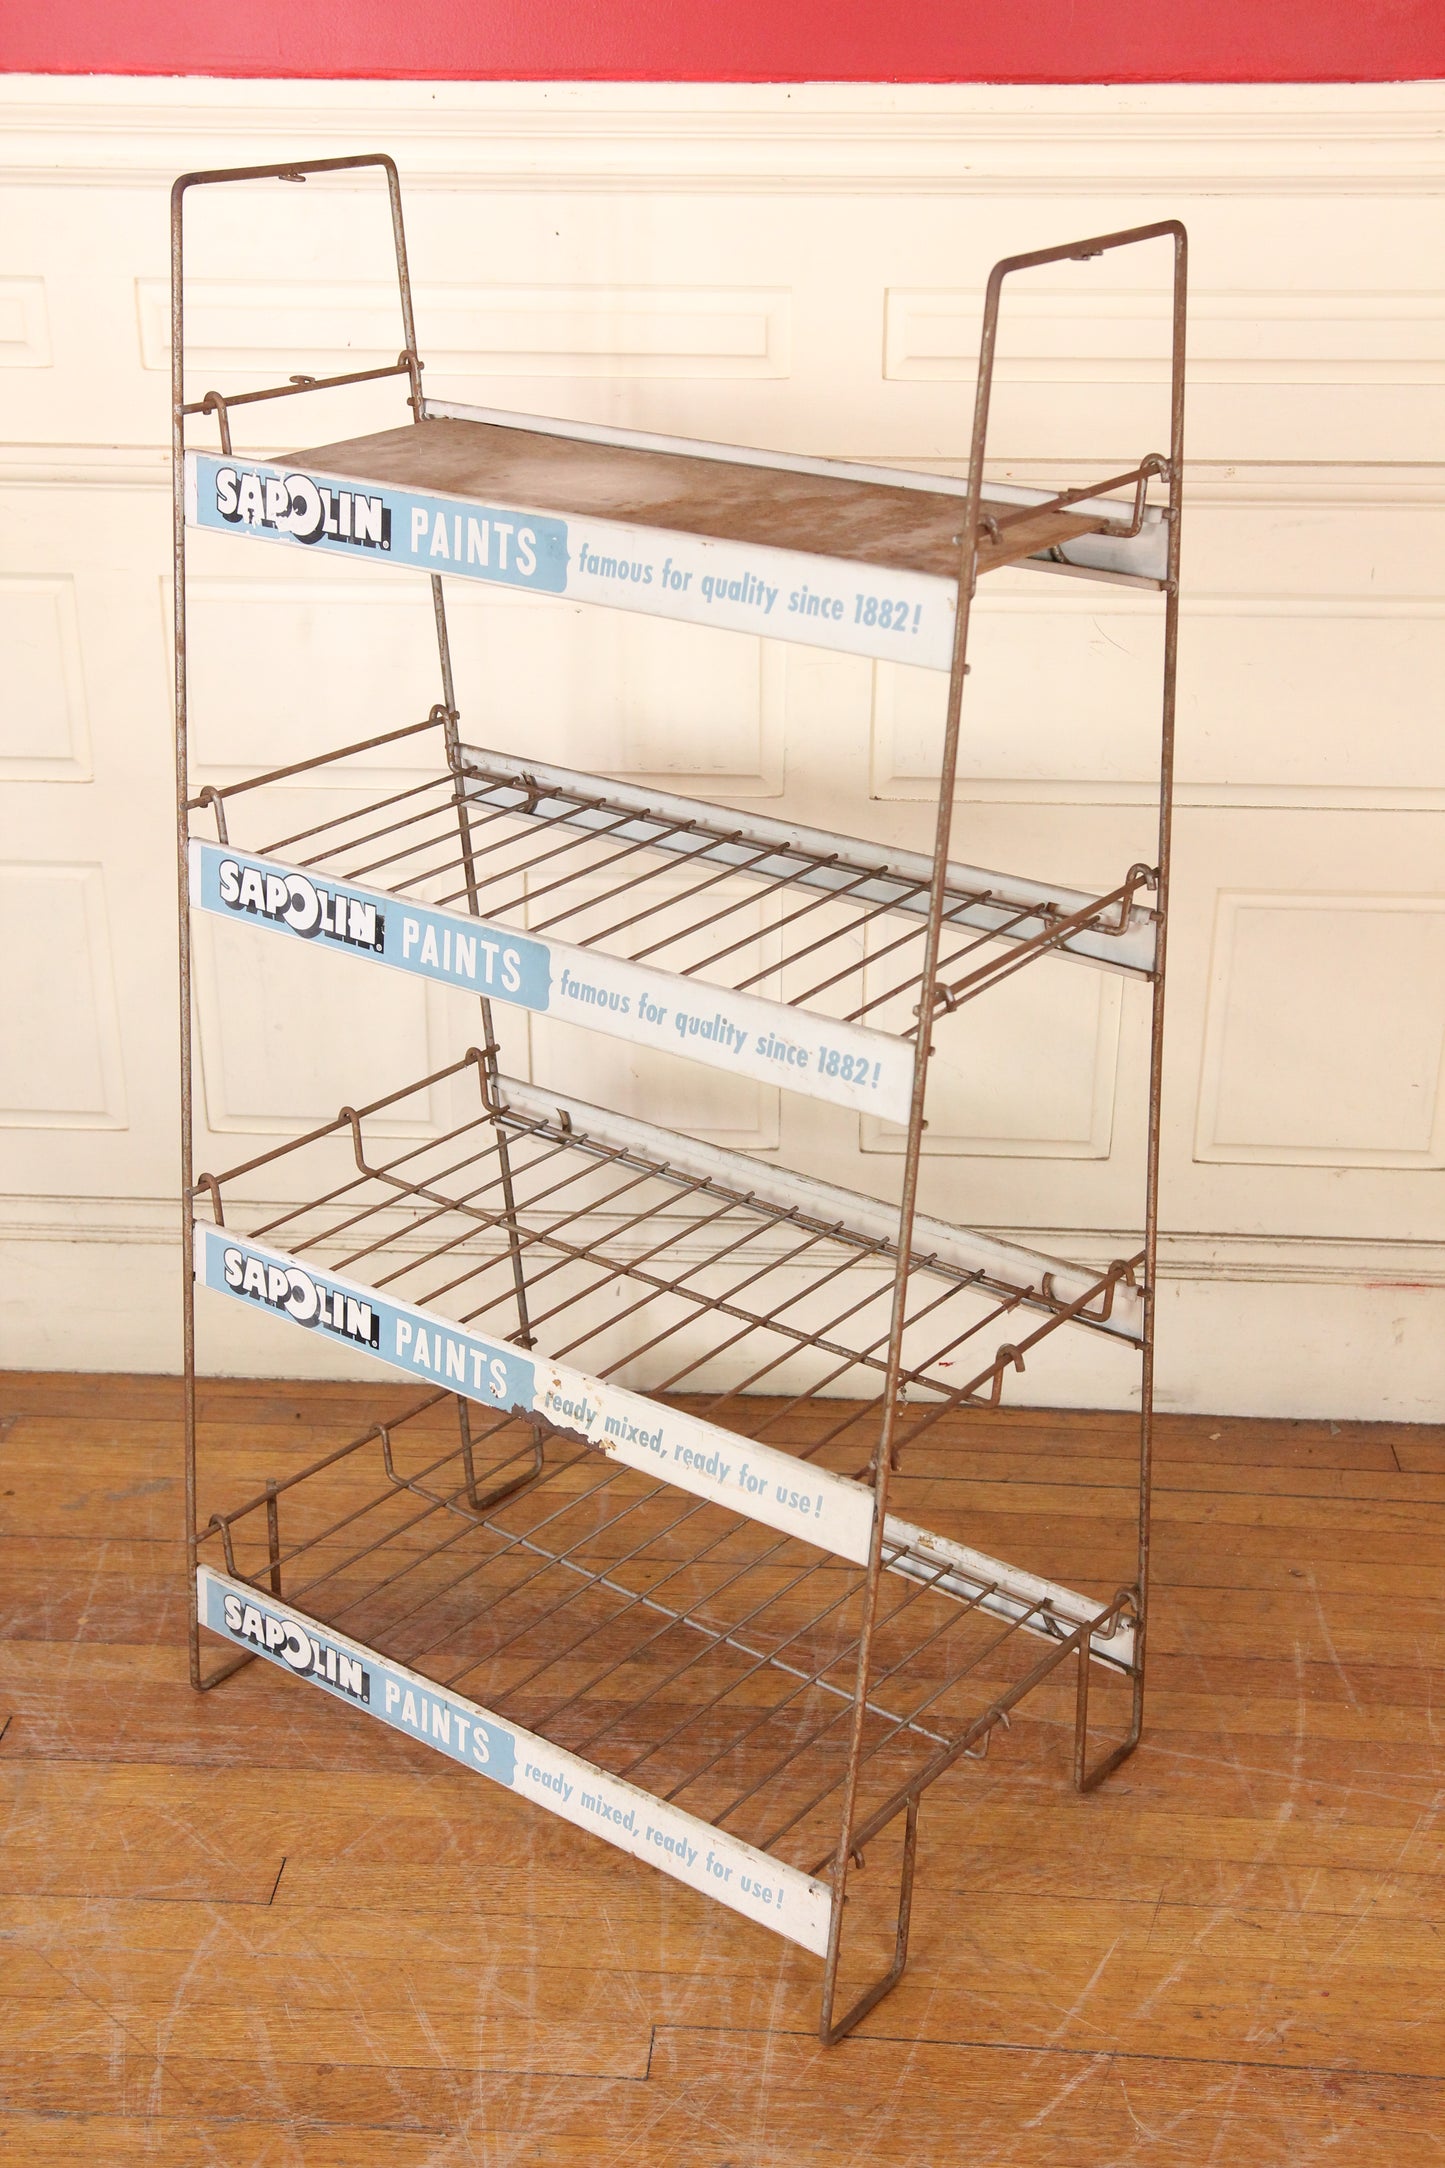 Sapolin Paints Metal Wire Display Rack Double Sided Advertising Shelf